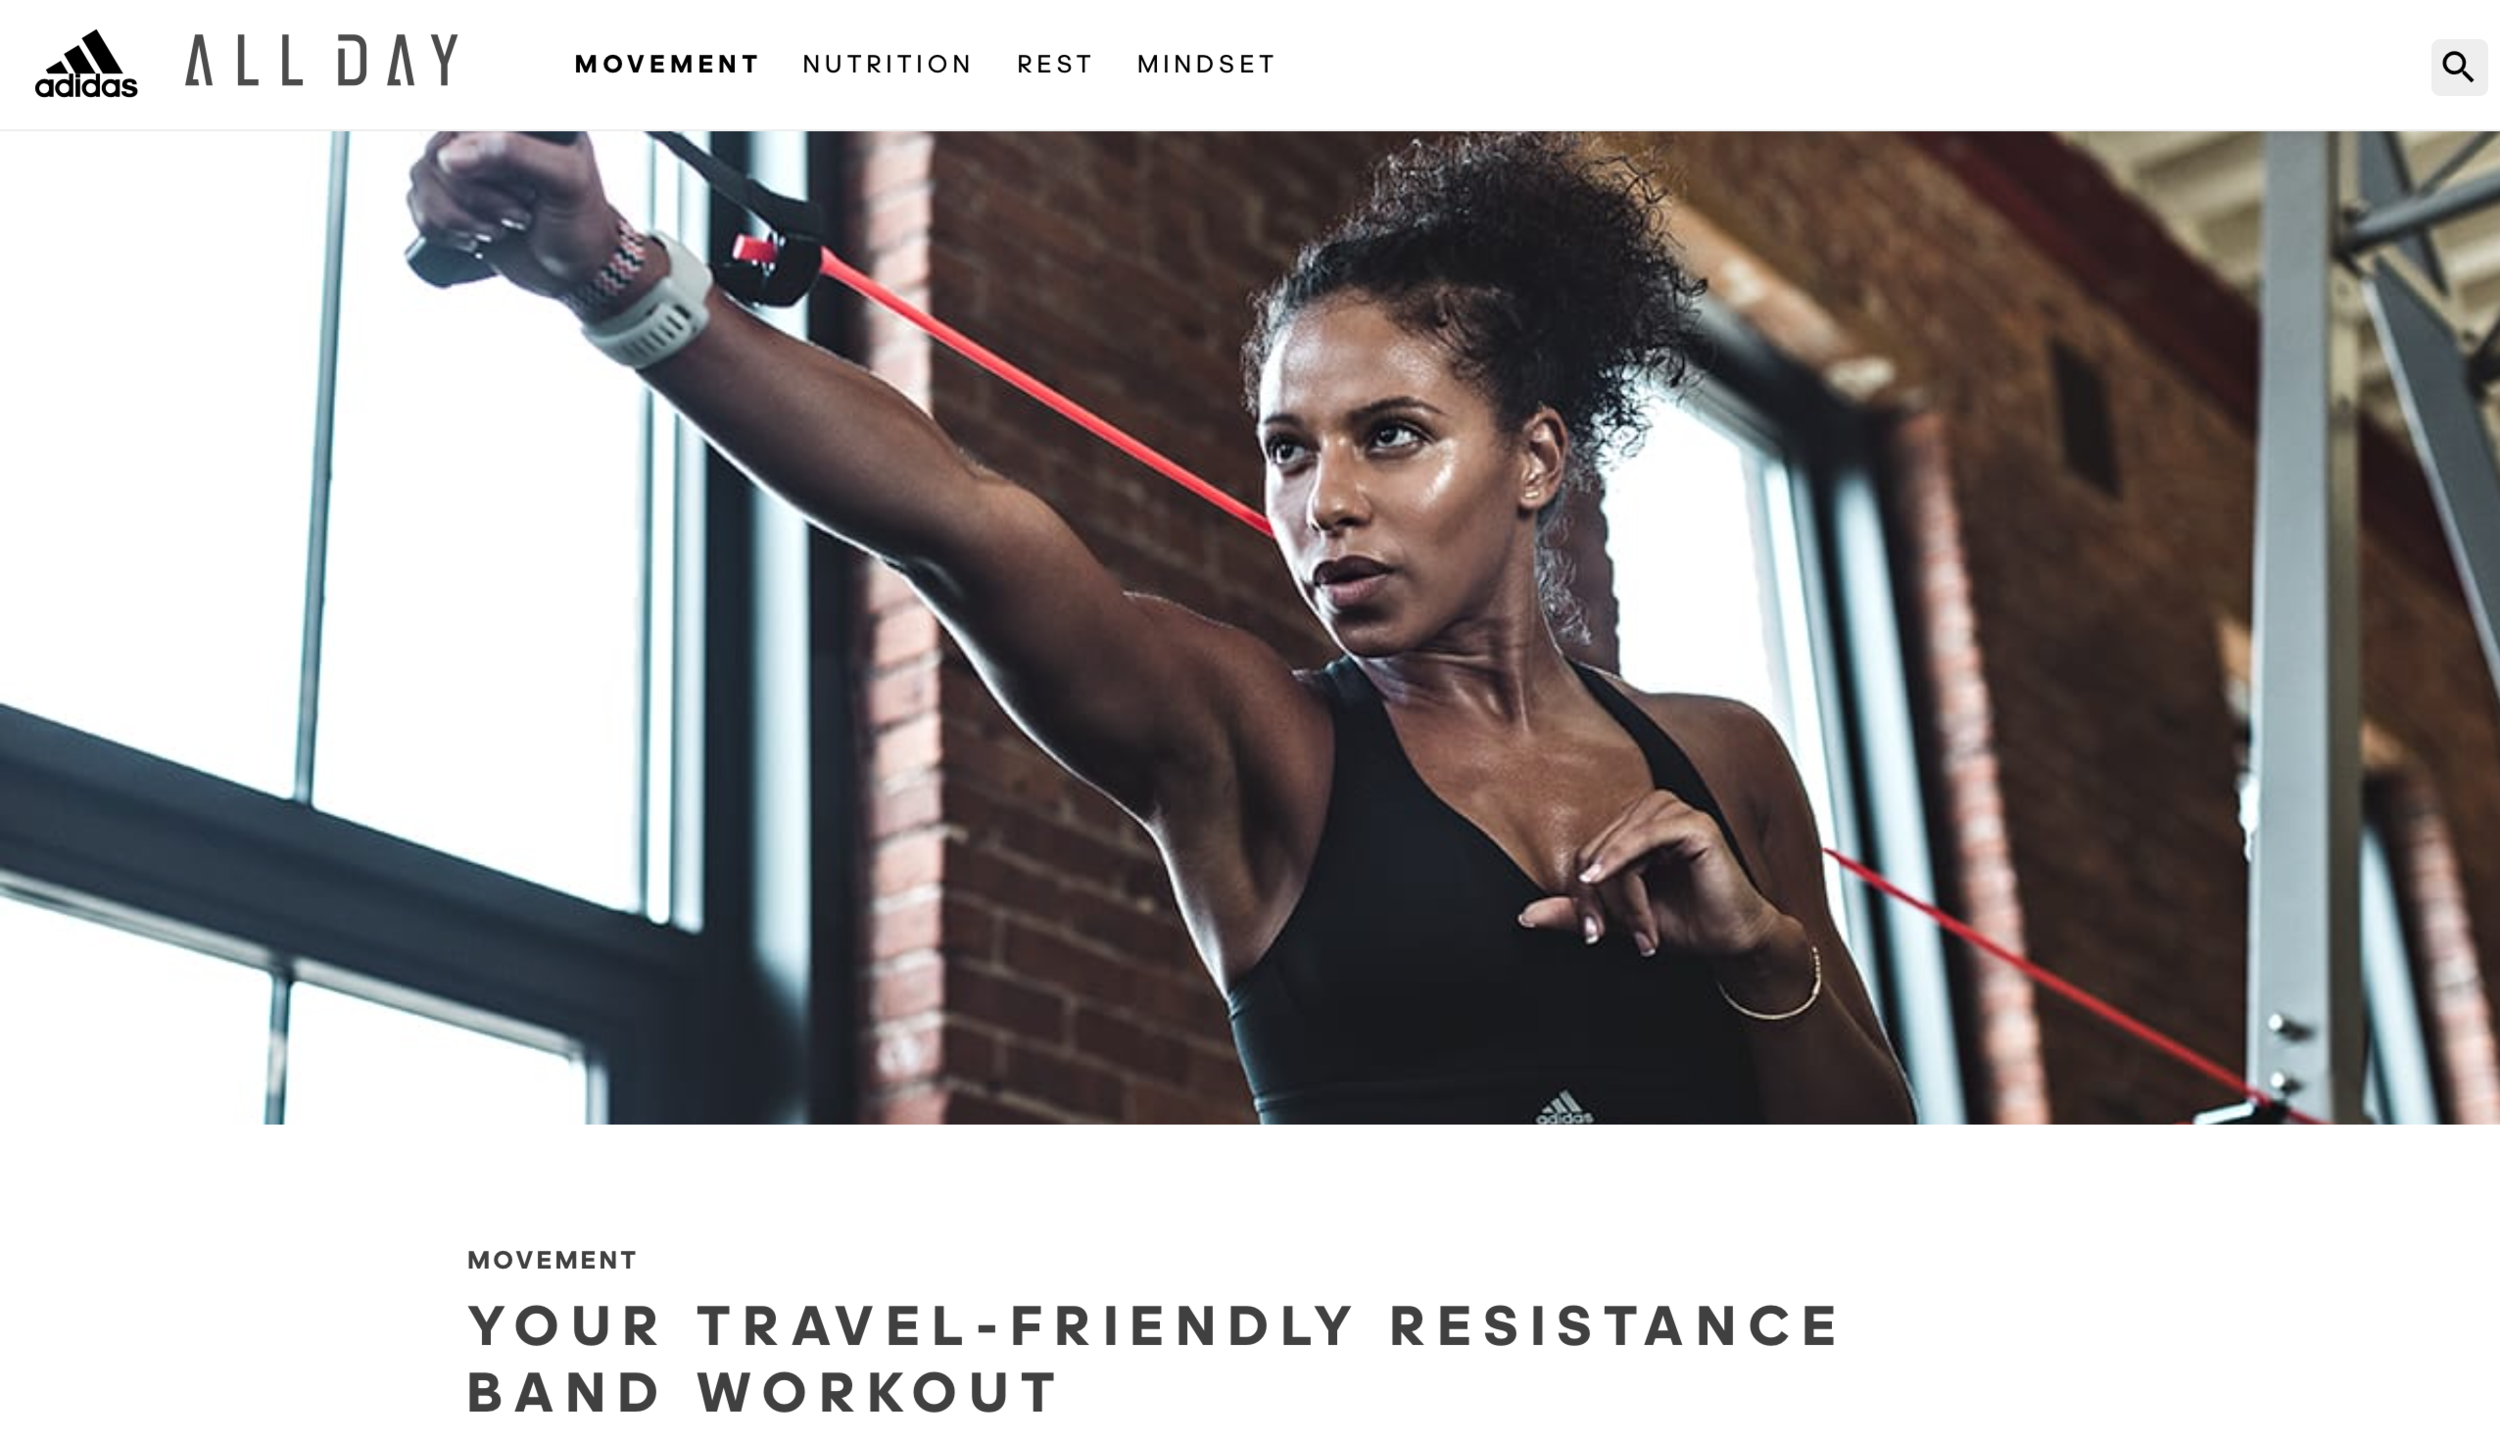 Adidas: Your Travel-friendly résistance band workout